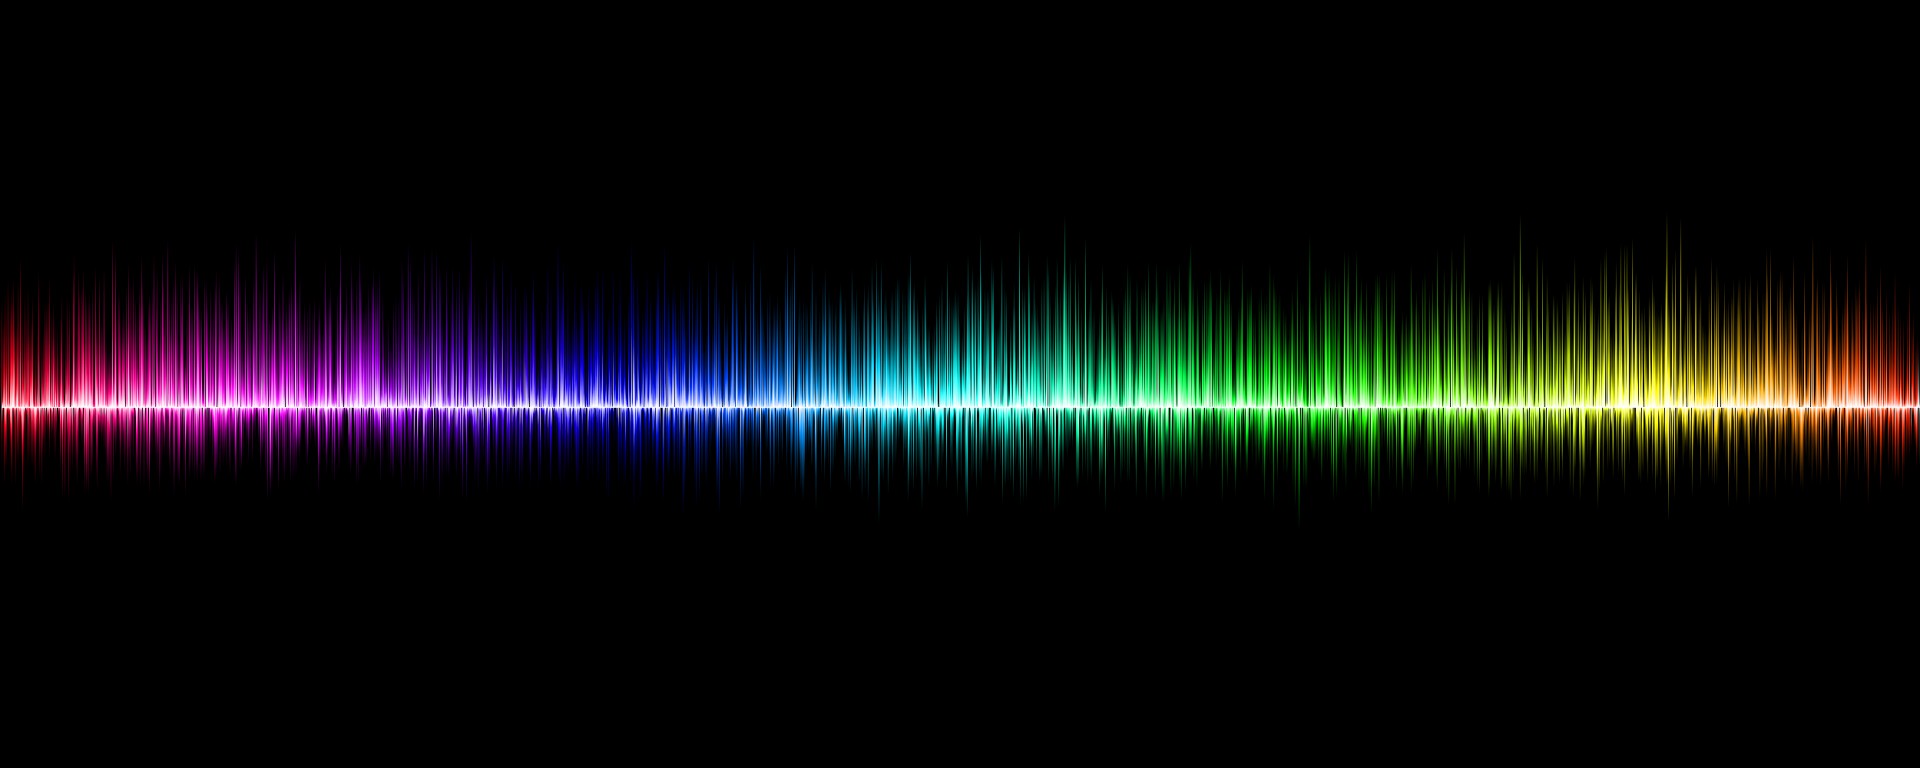 sound waves and visible spectrum graphic